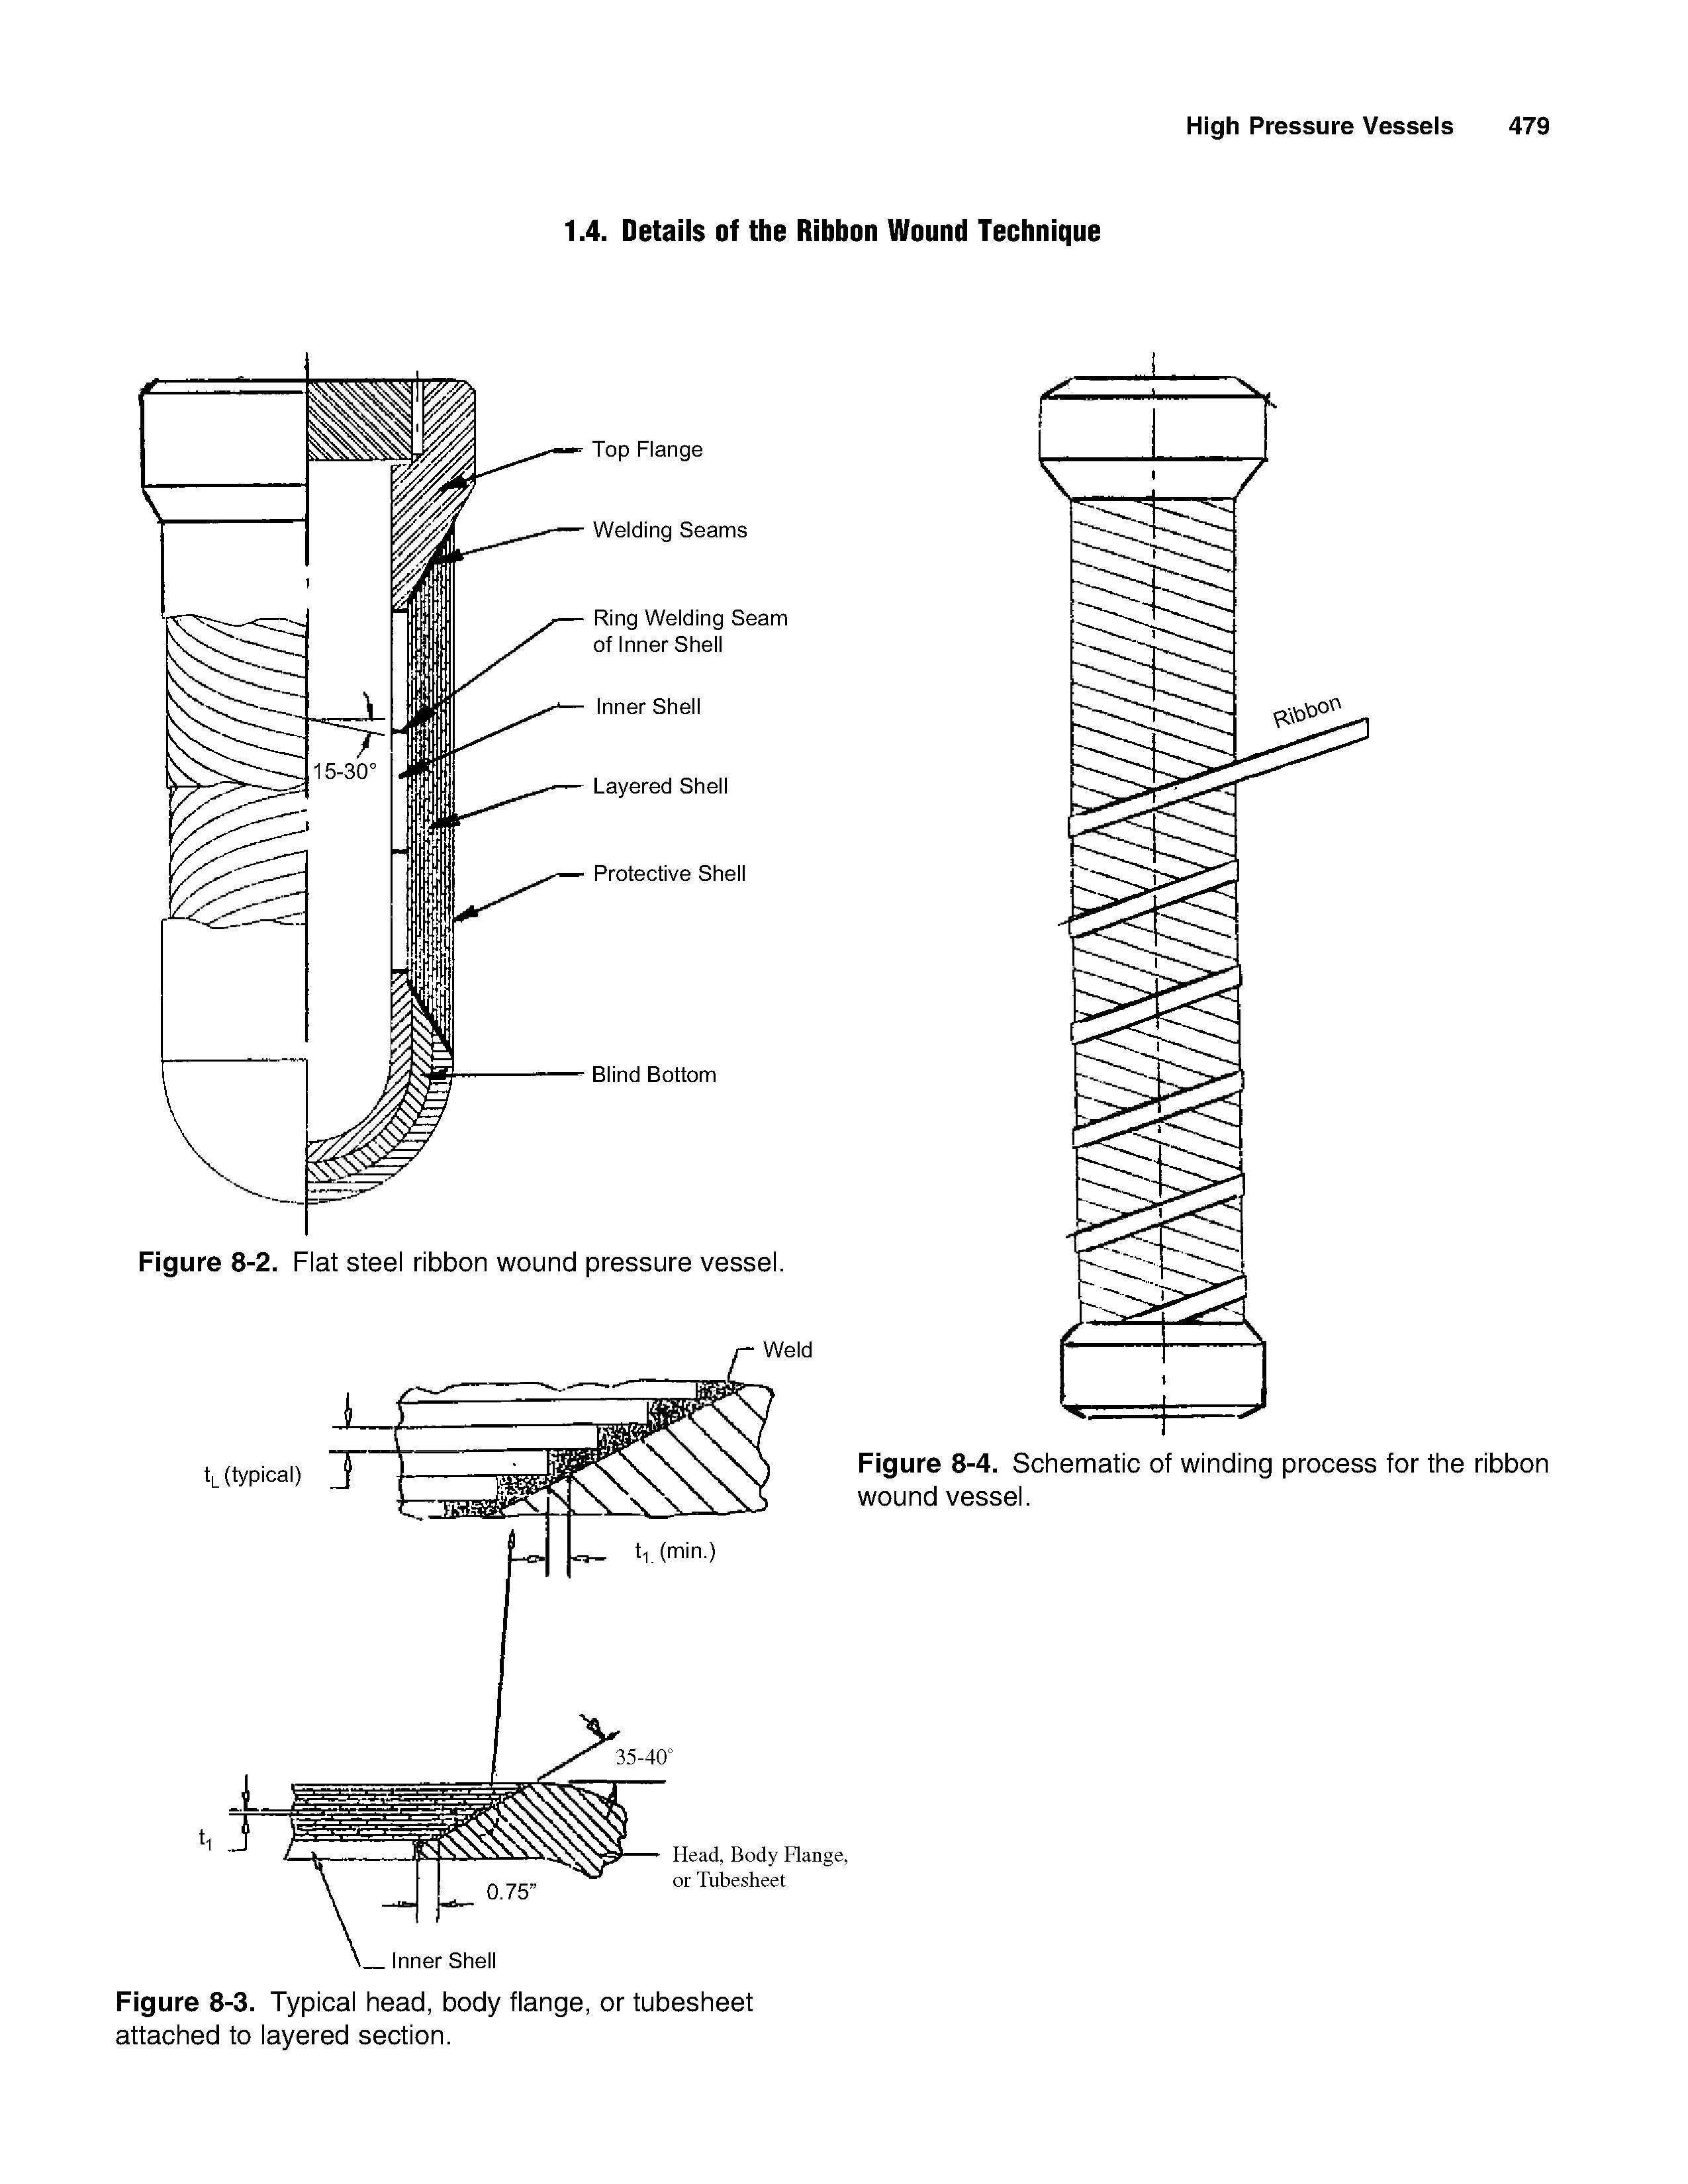 Figure 8-4. Schematic of winding process for the ribbon wound vessel.